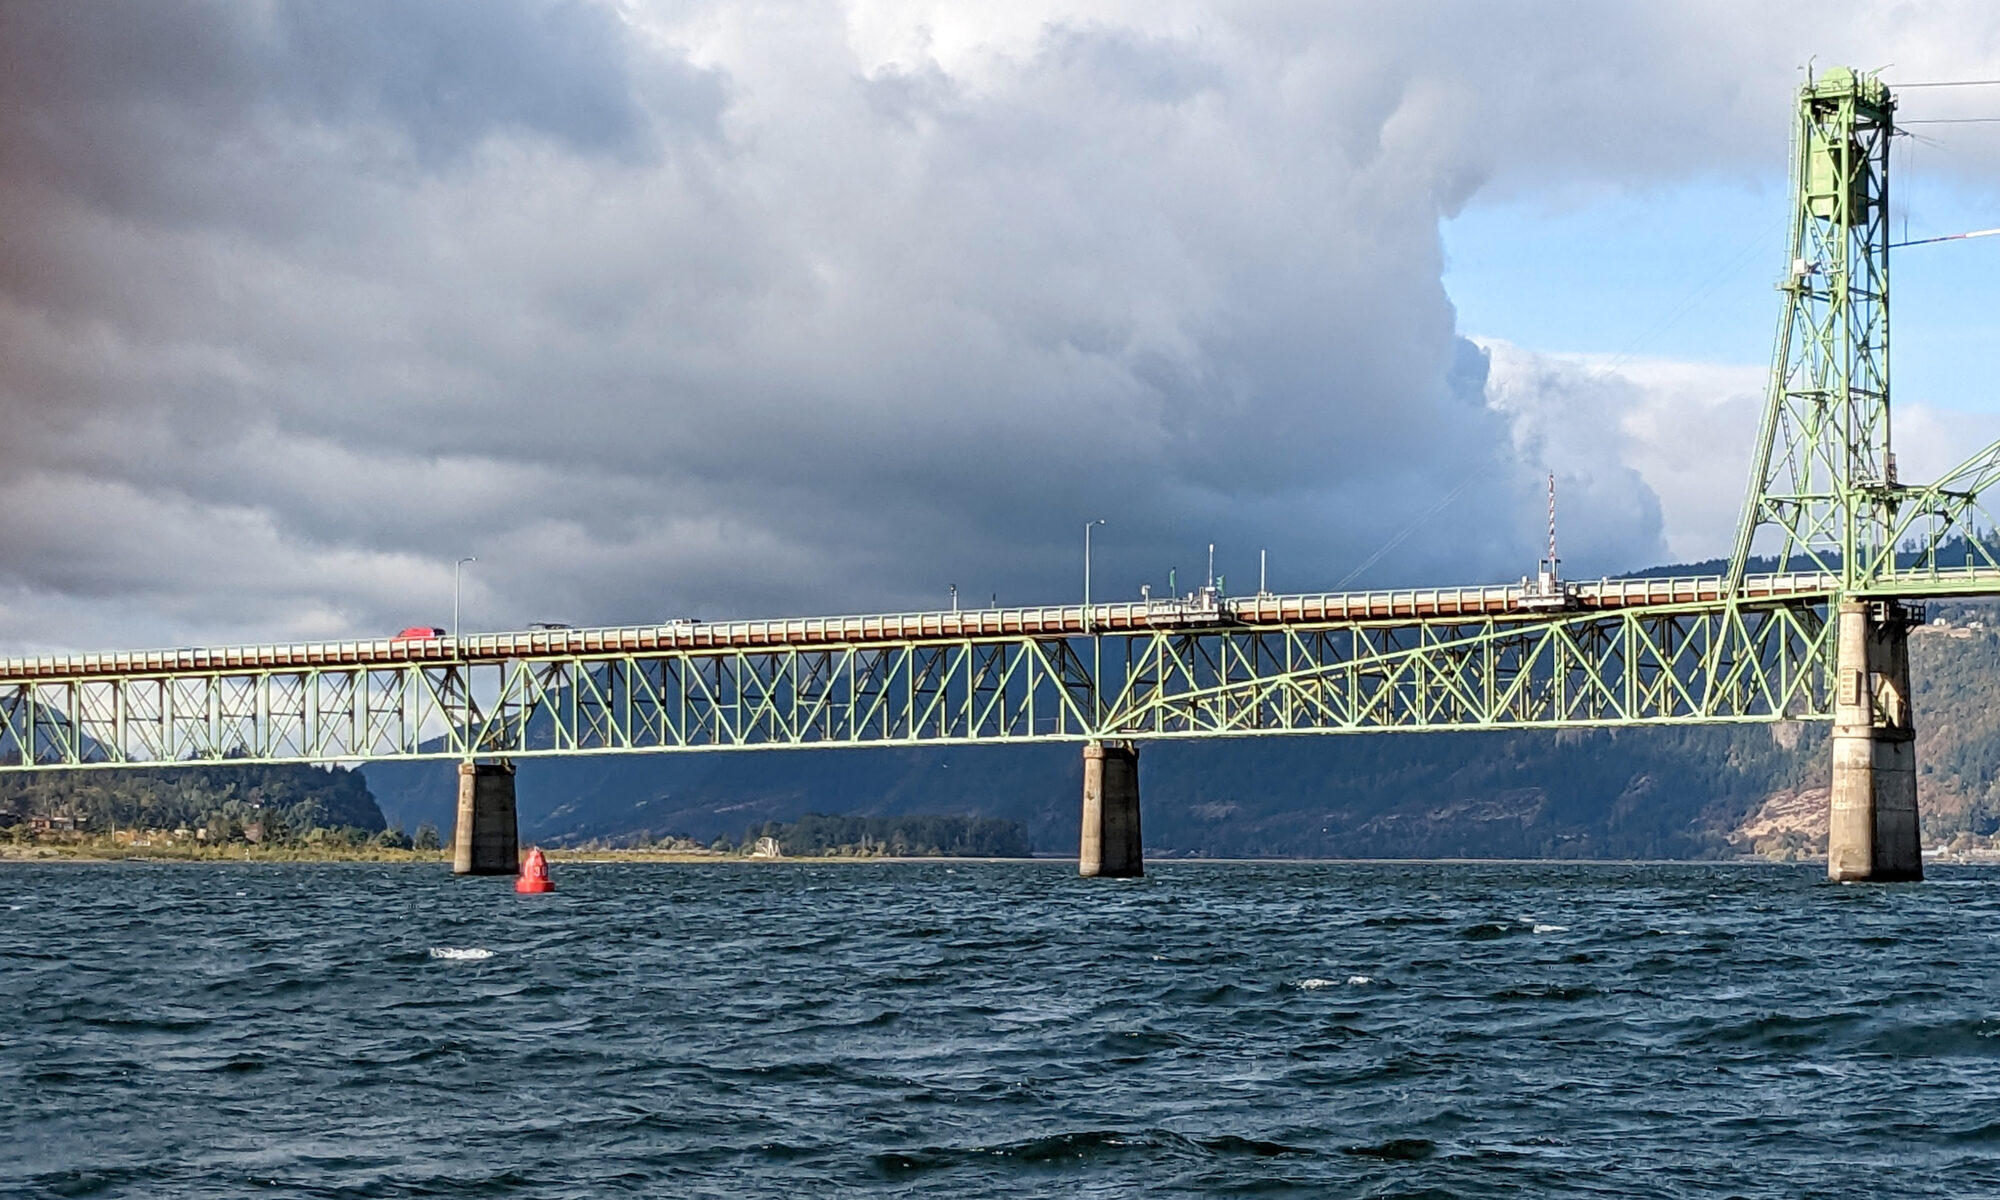 An image of the Hood River Bridge crossing the Columbia River.